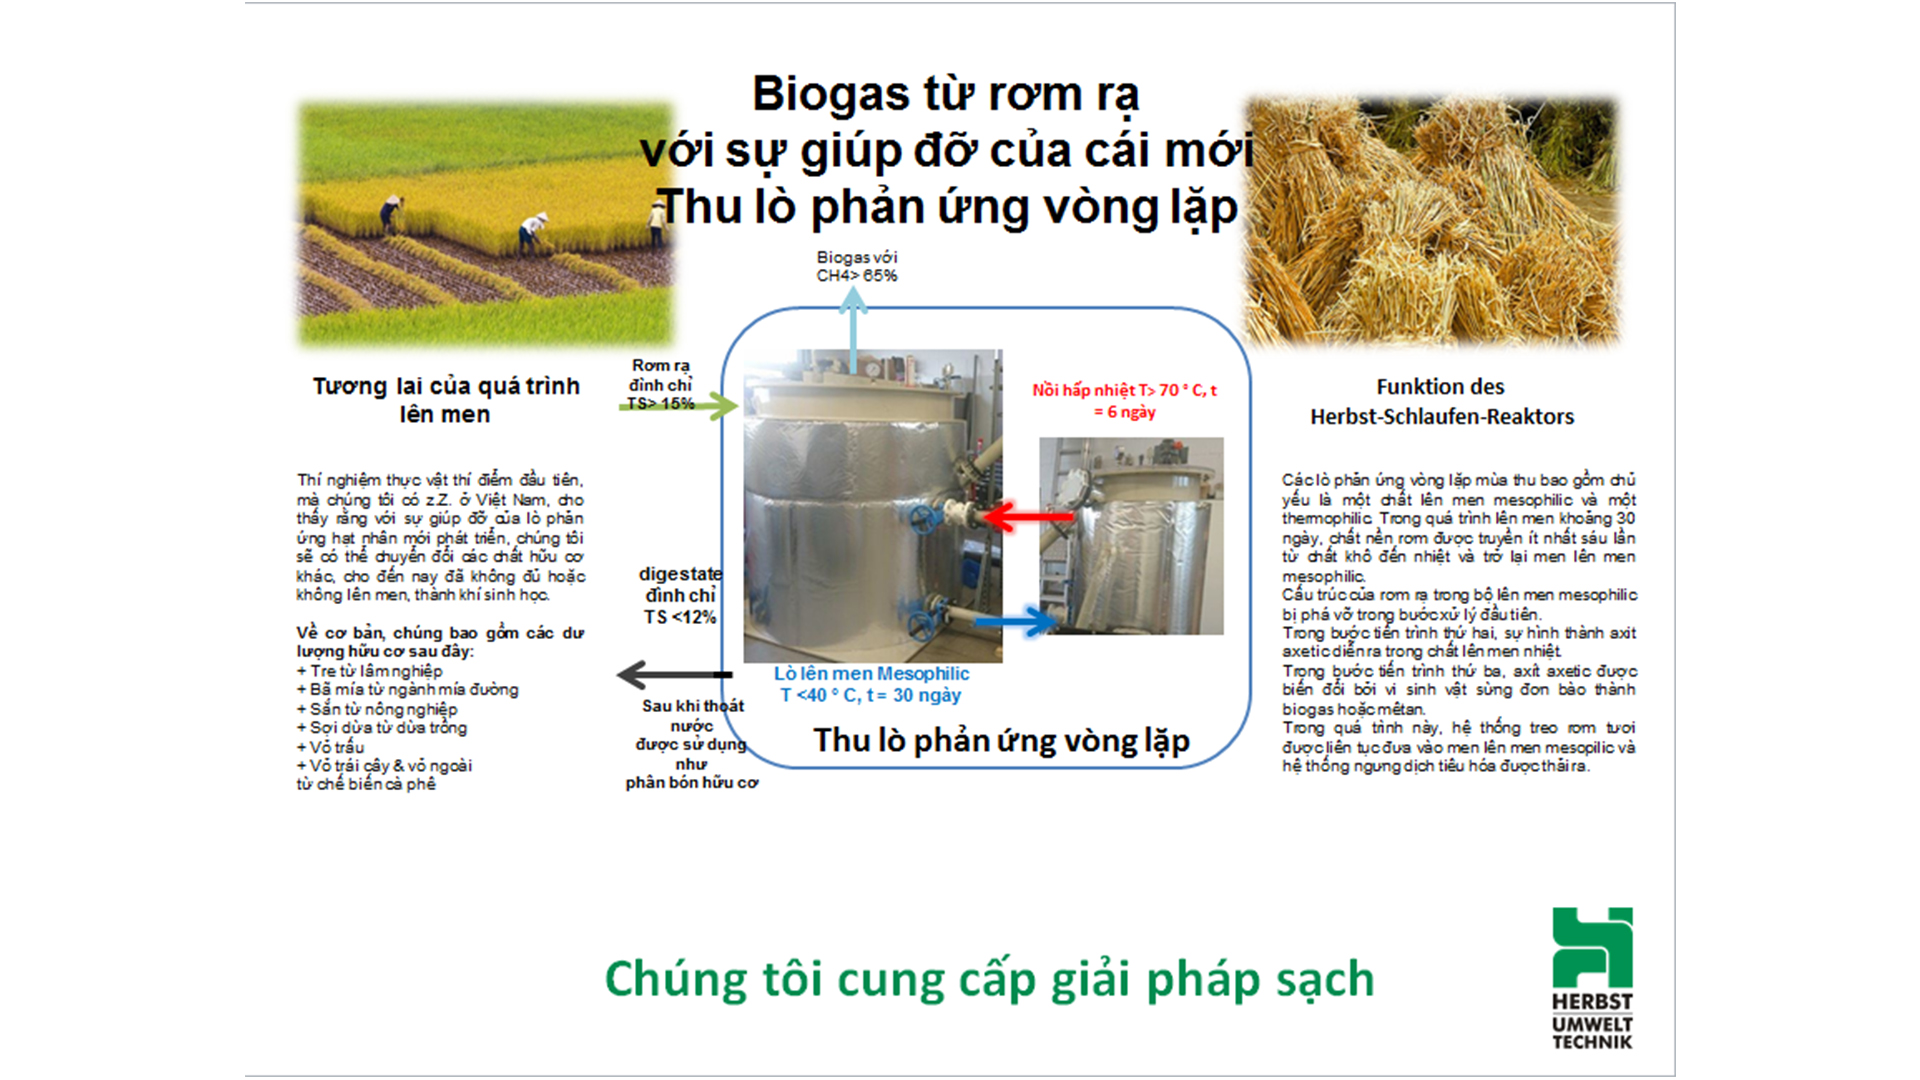 cong-nghe-biogas-tu-chat-thai-nong-nghiep-tien-tien-the-gioi